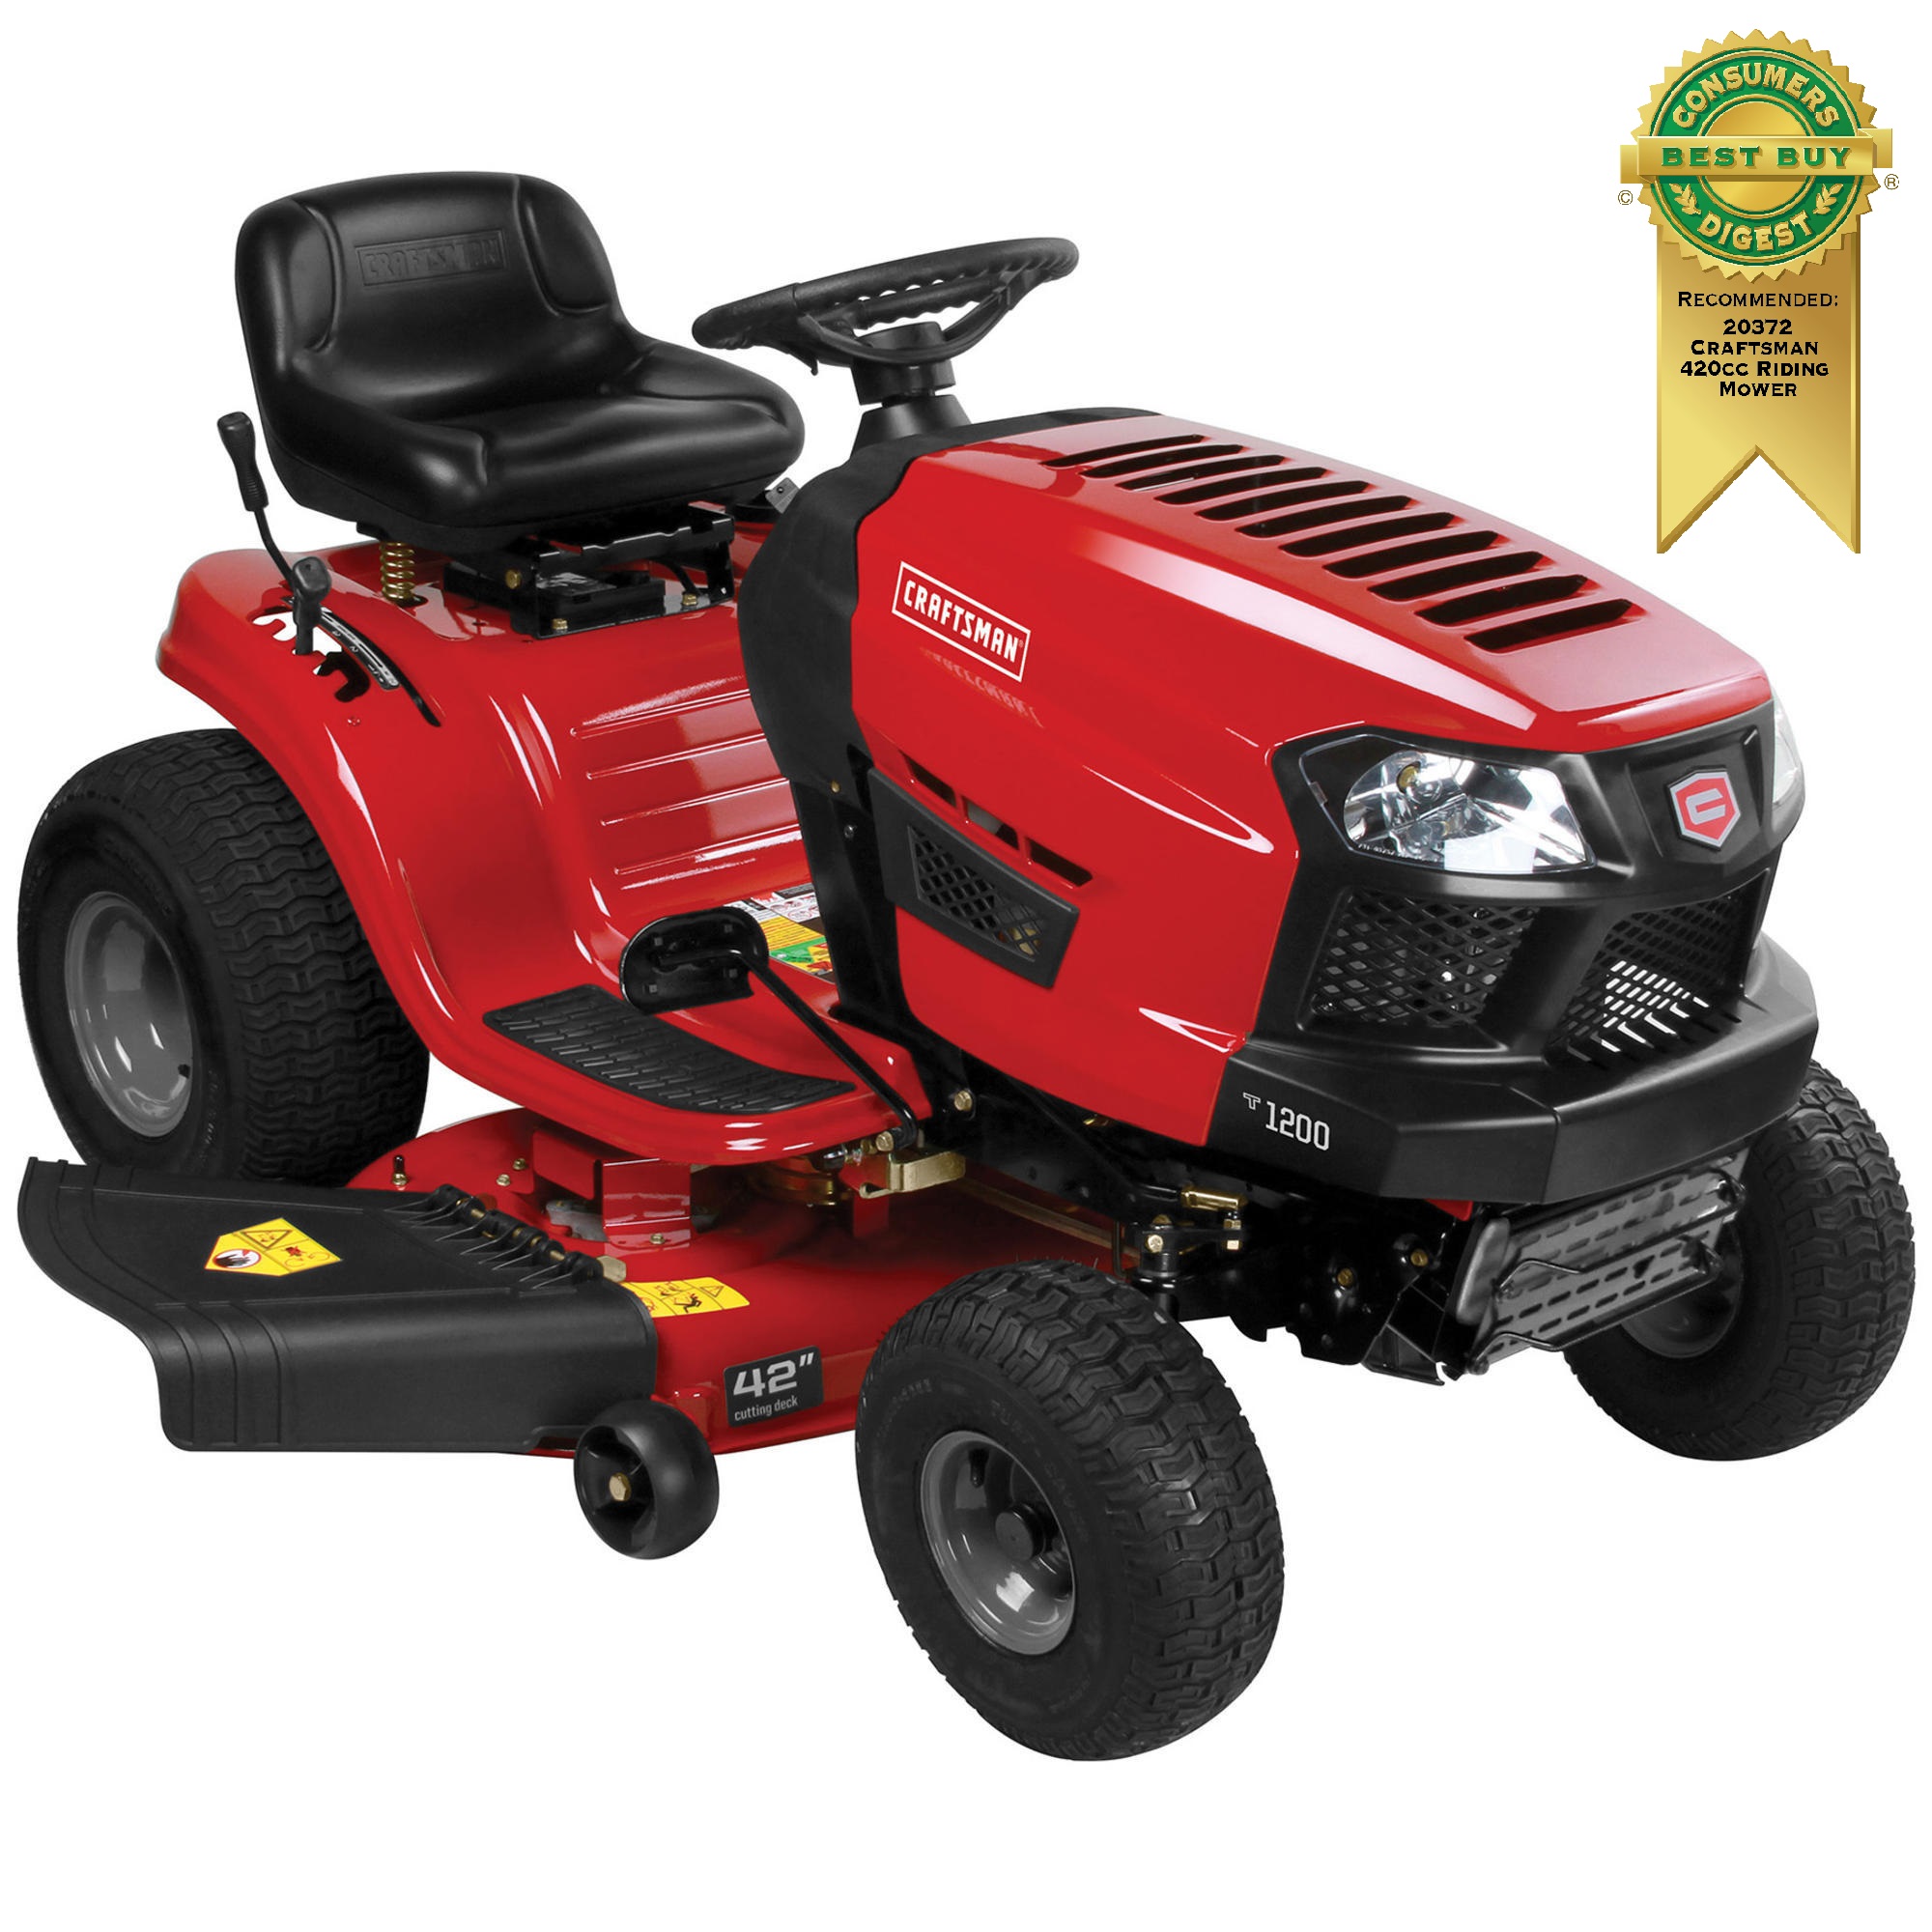 What kind of oil does my Craftsman lawnmower use?